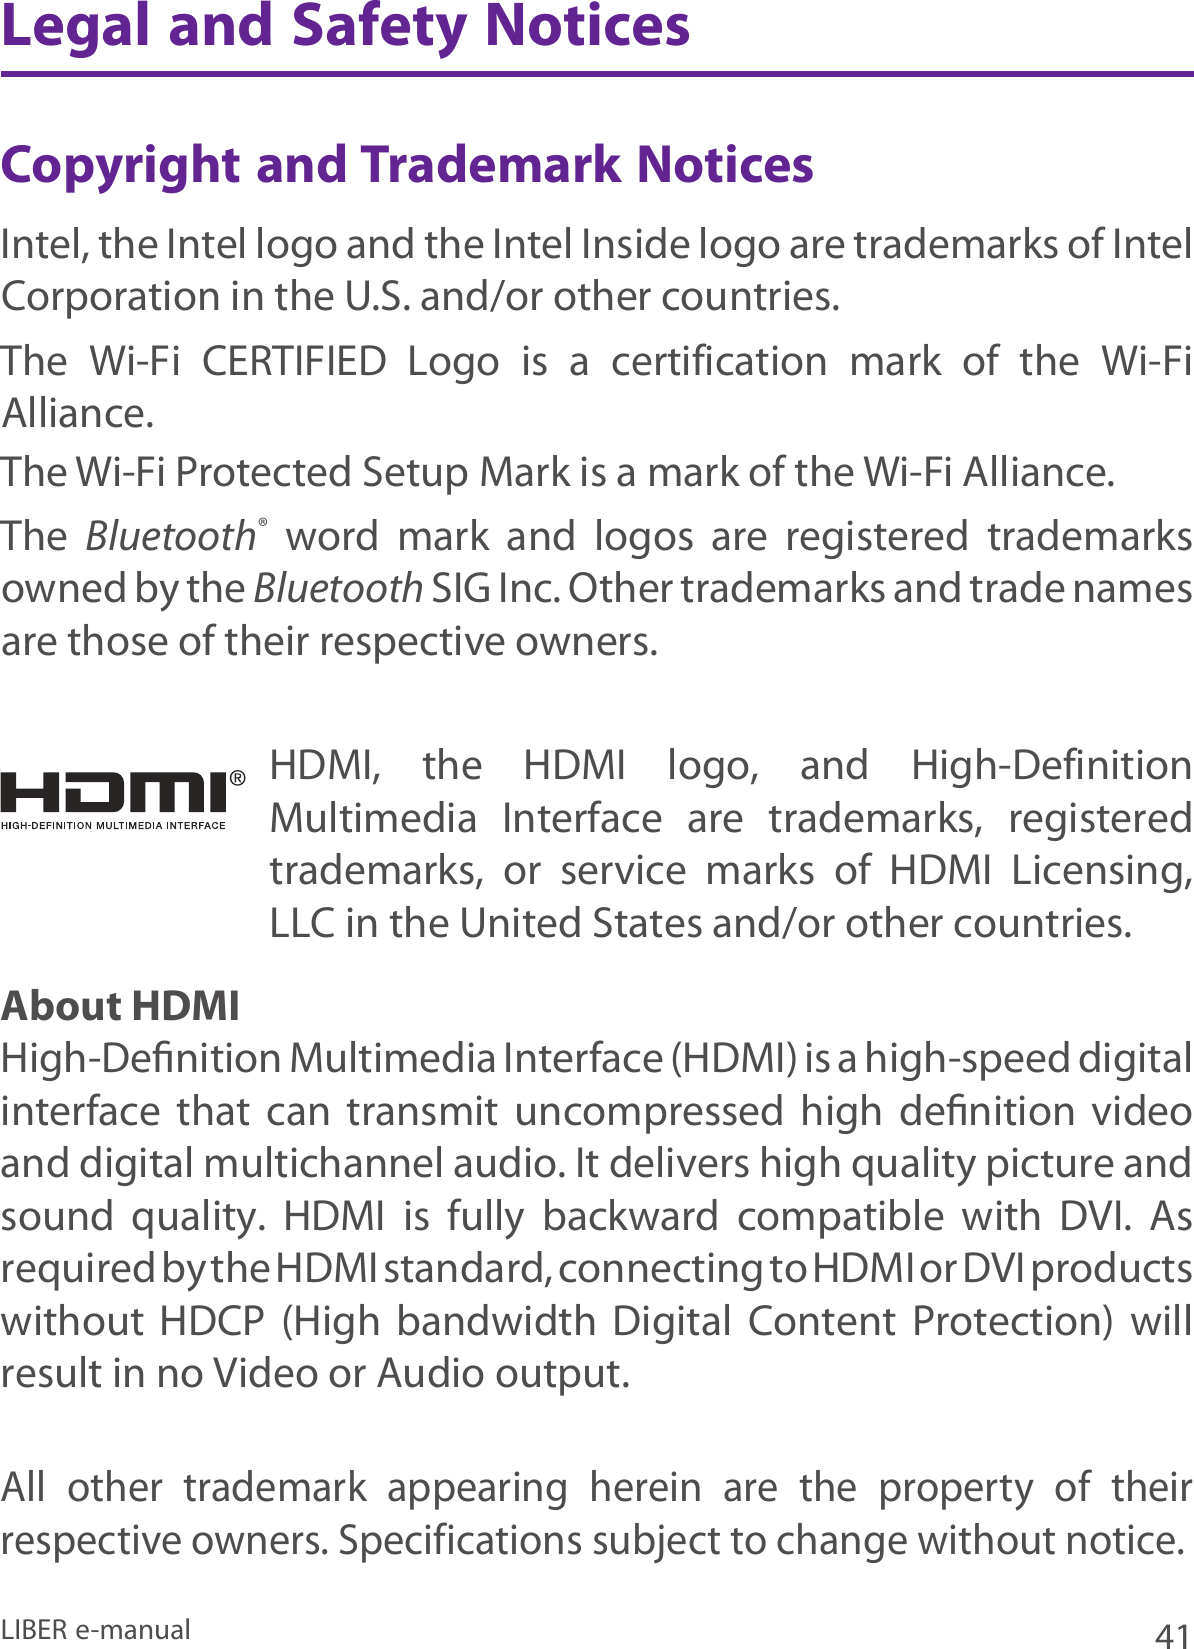 41LIBER e-manualLegal and Safety NoticesCopyright and Trademark Notices Intel, the Intel logo and the Intel Inside logo are trademarks of Intel Corporation in the U.S. and/or other countries.The  Wi-Fi  CERTIFIED  Logo  is  a  certification  mark  of  the  Wi-Fi Alliance. The Wi-Fi Protected Setup Mark is a mark of the Wi-Fi Alliance.The  Bluetooth®  word  mark  and  logos  are  registered  trademarks owned by the Bluetooth SIG Inc. Other trademarks and trade names are those of their respective owners.About HDMIHigh-Deﬁnition Multimedia Interface (HDMI) is a high-speed digital interface  that  can  transmit  uncompressed  high  deﬁnition  video and digital multichannel audio. It delivers high quality picture and sound  quality.  HDMI  is  fully  backward  compatible  with  DVI.  As required by the HDMI standard, connecting to HDMI or DVI products without  HDCP  (High  bandwidth  Digital  Content  Protection)  will result in no Video or Audio output.HDMI,  the  HDMI  logo,  and  High-Definition Multimedia  Interface  are  trademarks,  registered trademarks,  or  service  marks  of  HDMI  Licensing, LLC in the United States and/or other countries.All  other  trademark  appearing  herein  are  the  property  of  their respective owners. Specifications subject to change without notice.